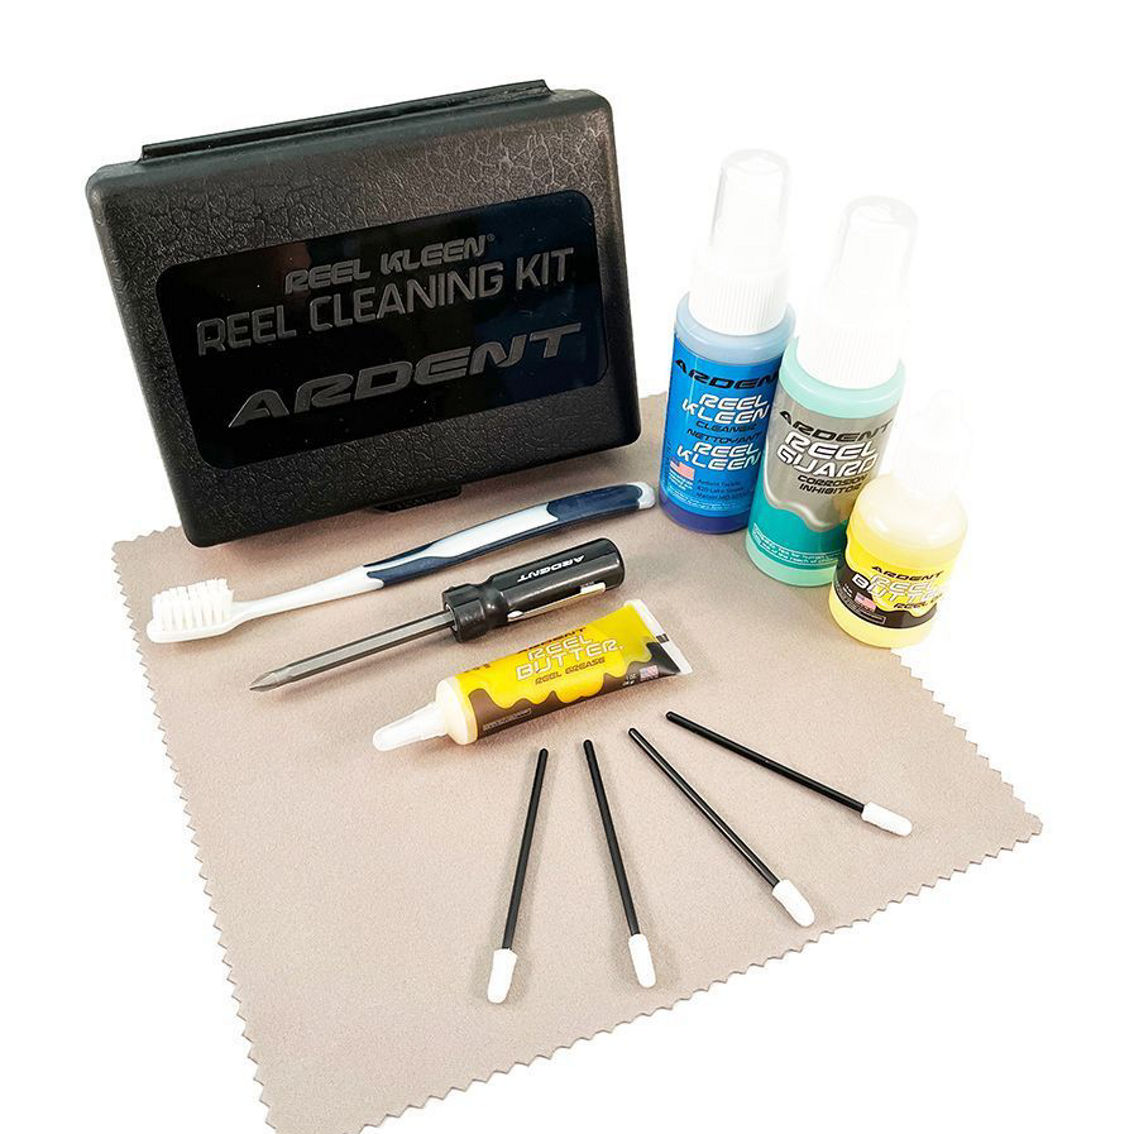 Ardent Reel Cleaning Kit For Saltwater Equipment